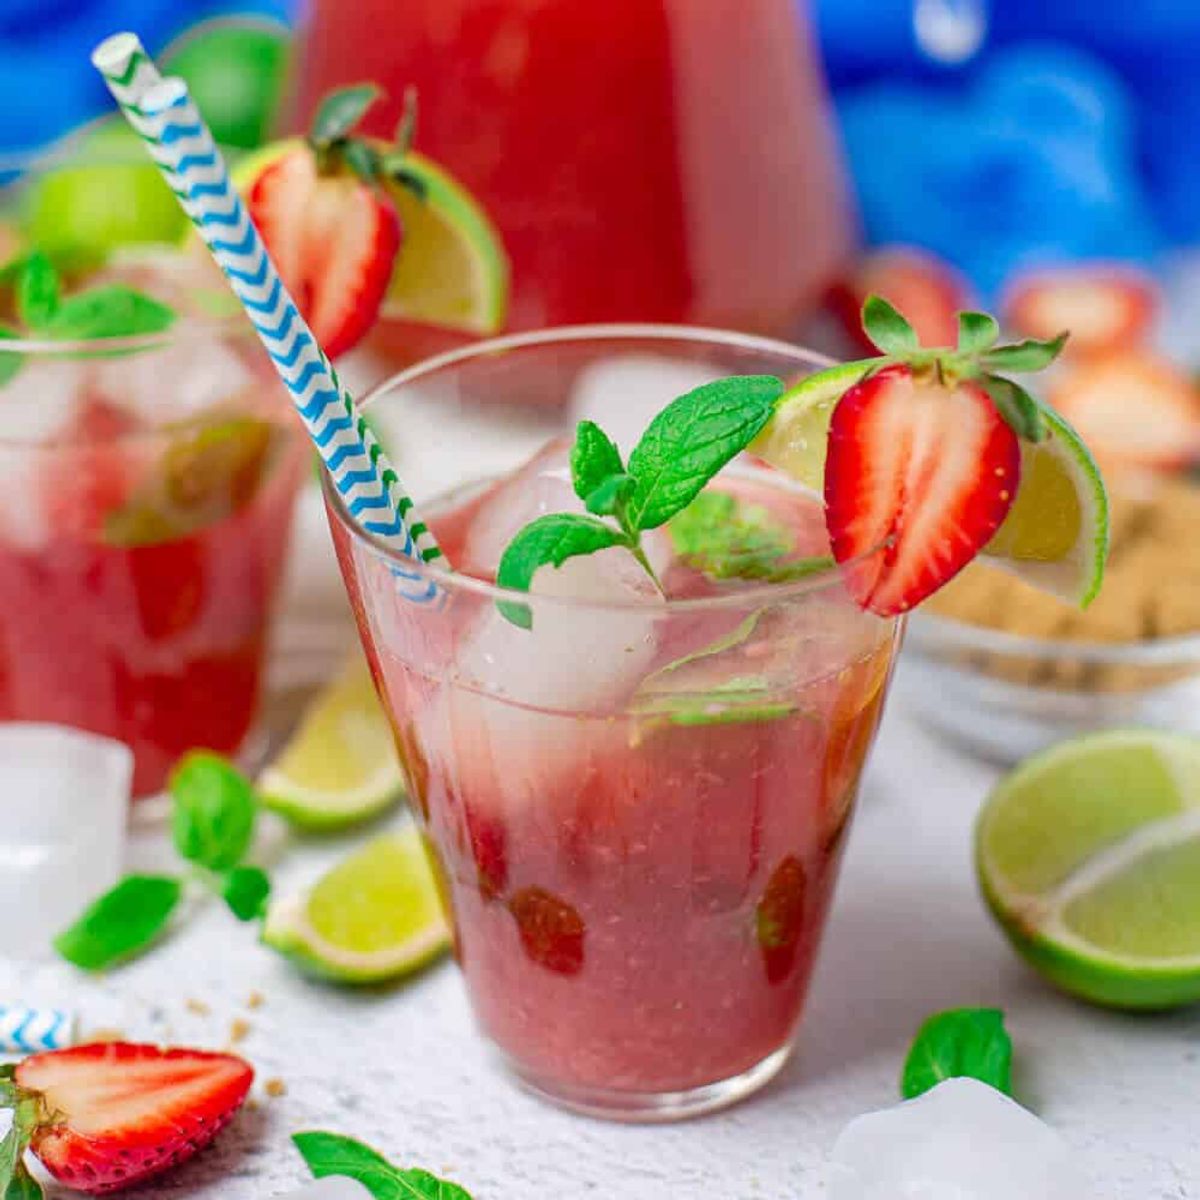 Strawberry Iced Tea with Mint - The Yummy Bowl